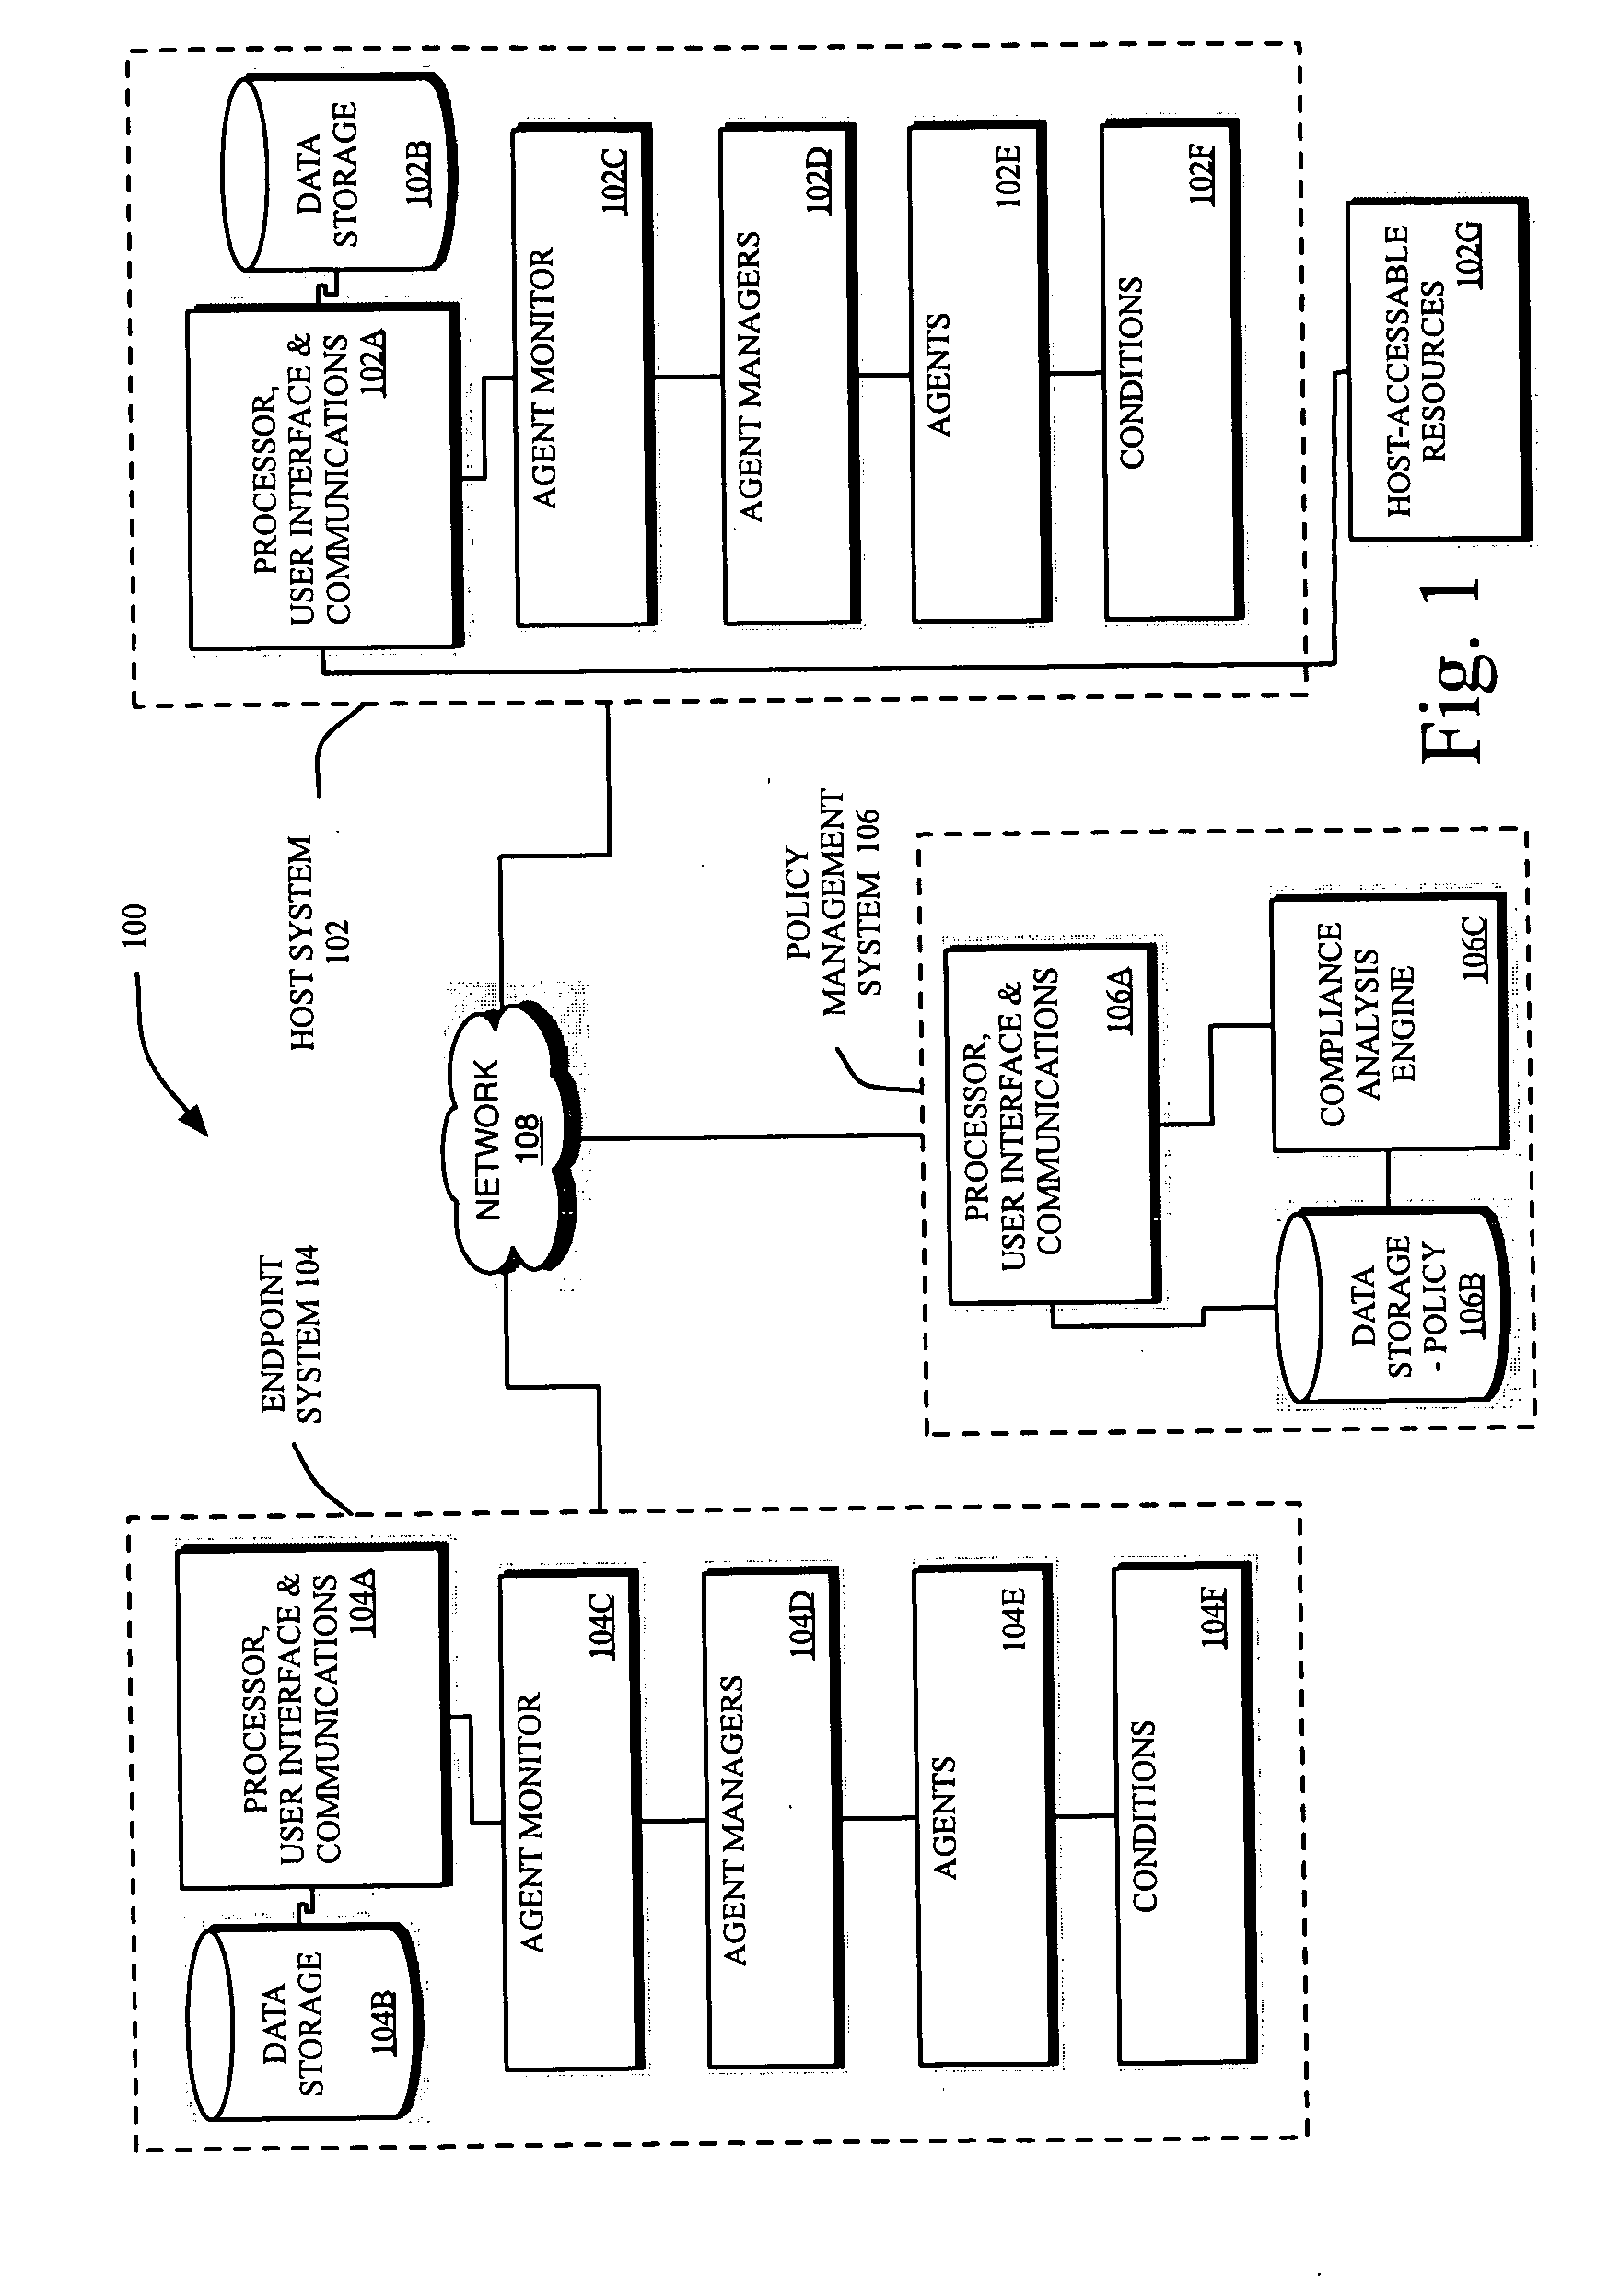 Method and systems for controlling access to computing resources based on known security vulnerabilities